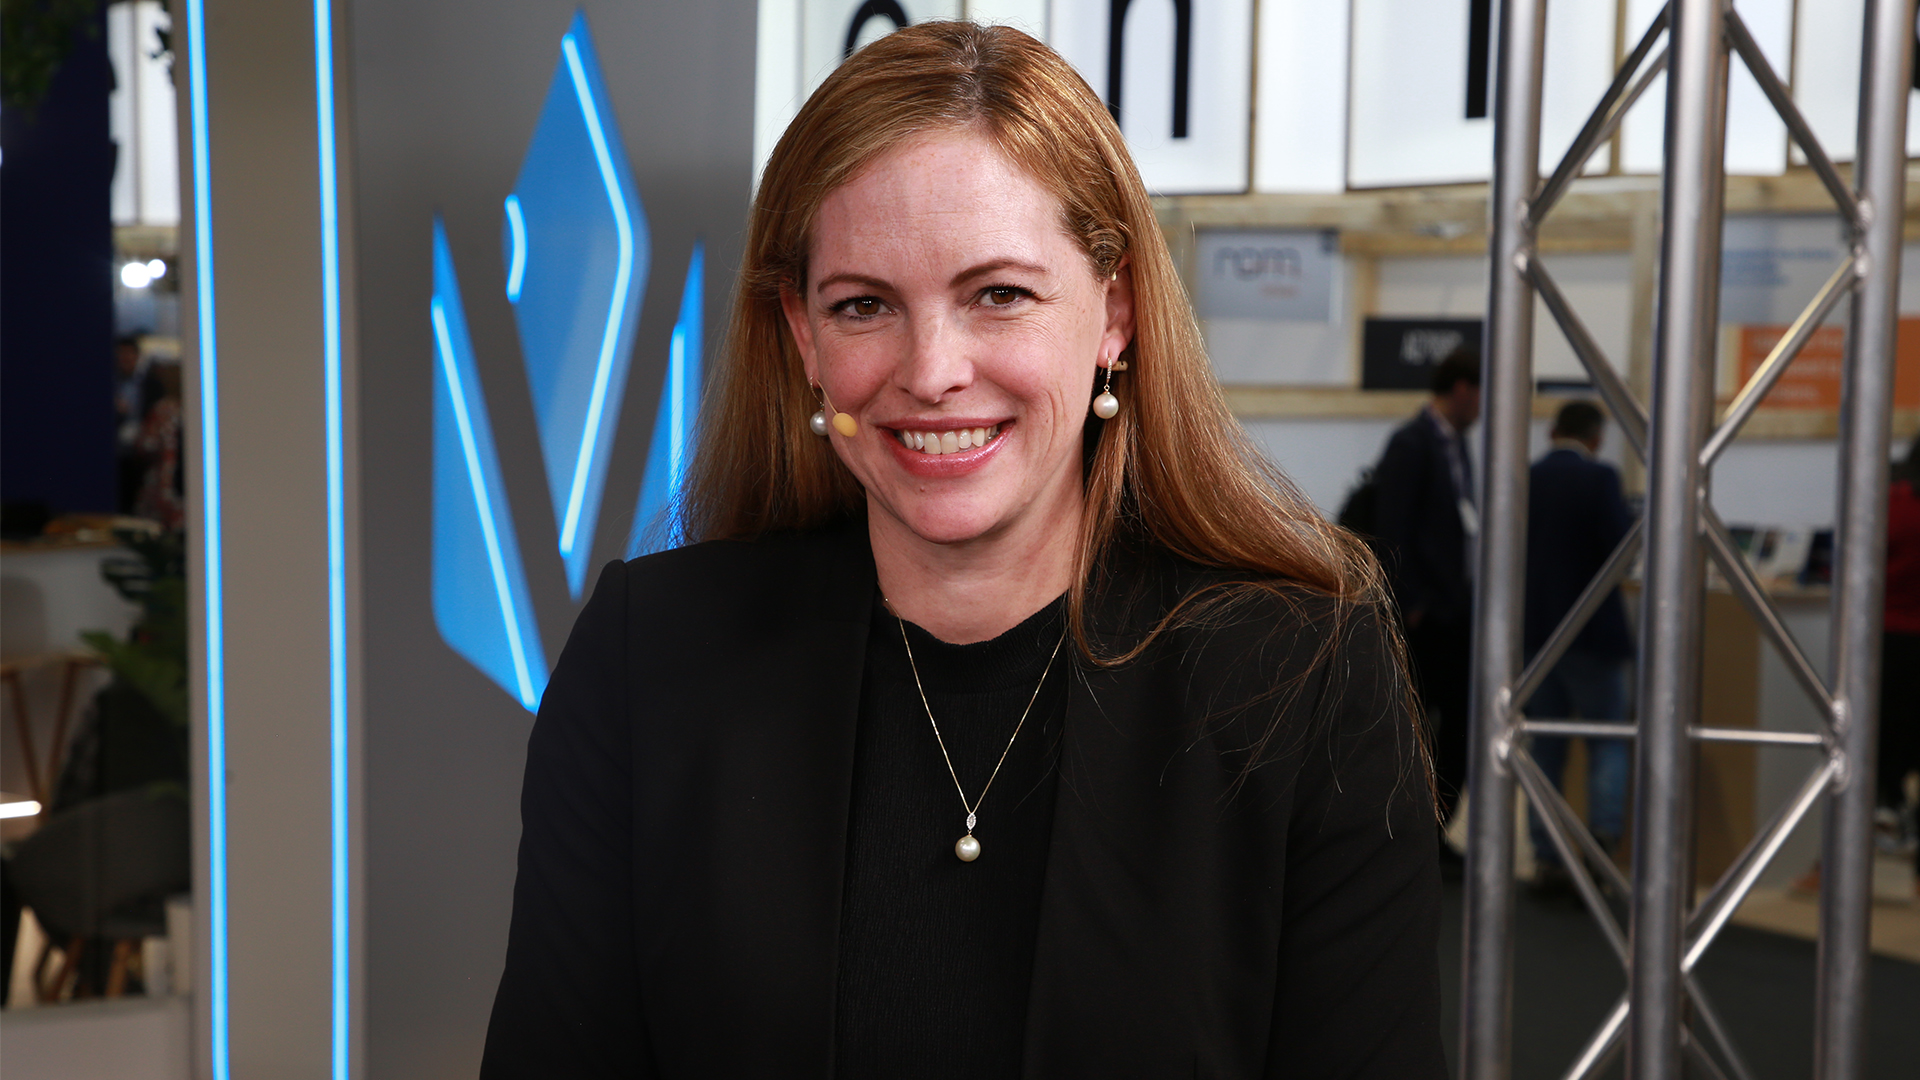 TheCUBE talks with Caitlin Halferty, global CDO of Ericsson, at MWC 2024, abaout the critical role that data management and AI play in transforming enterprises, as well as Ericsson's commitment to prioritizing data and AI.